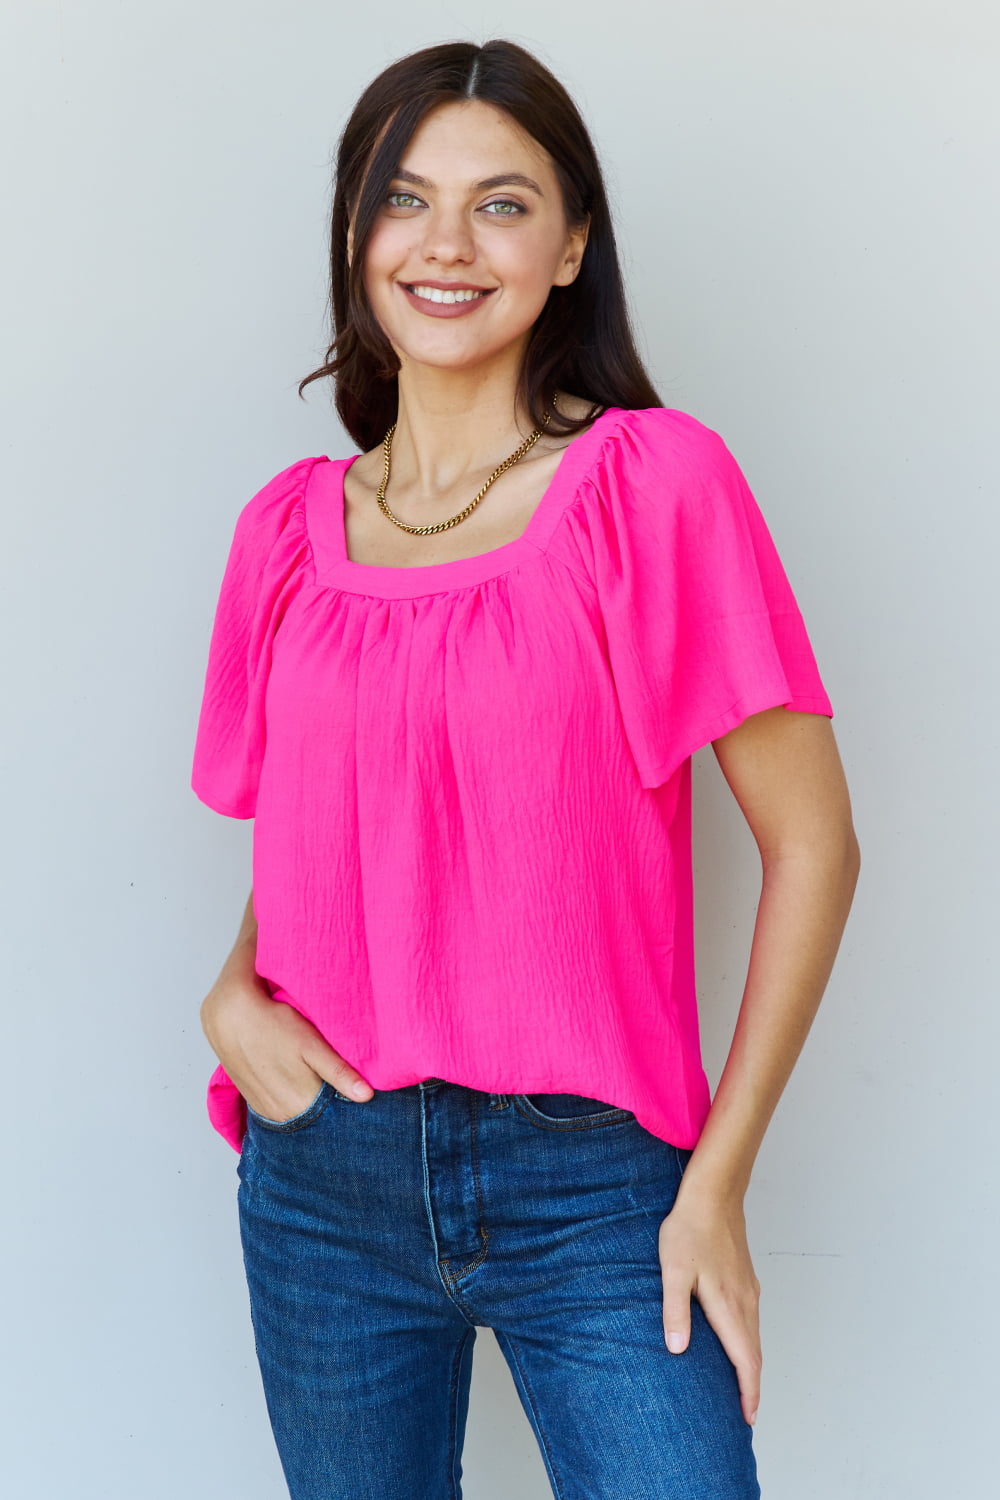 Keep Me Close Square Neck Short Sleeve Blouse in Fuchsia - Pink / S - Women’s Clothing & Accessories - Dresses - 1